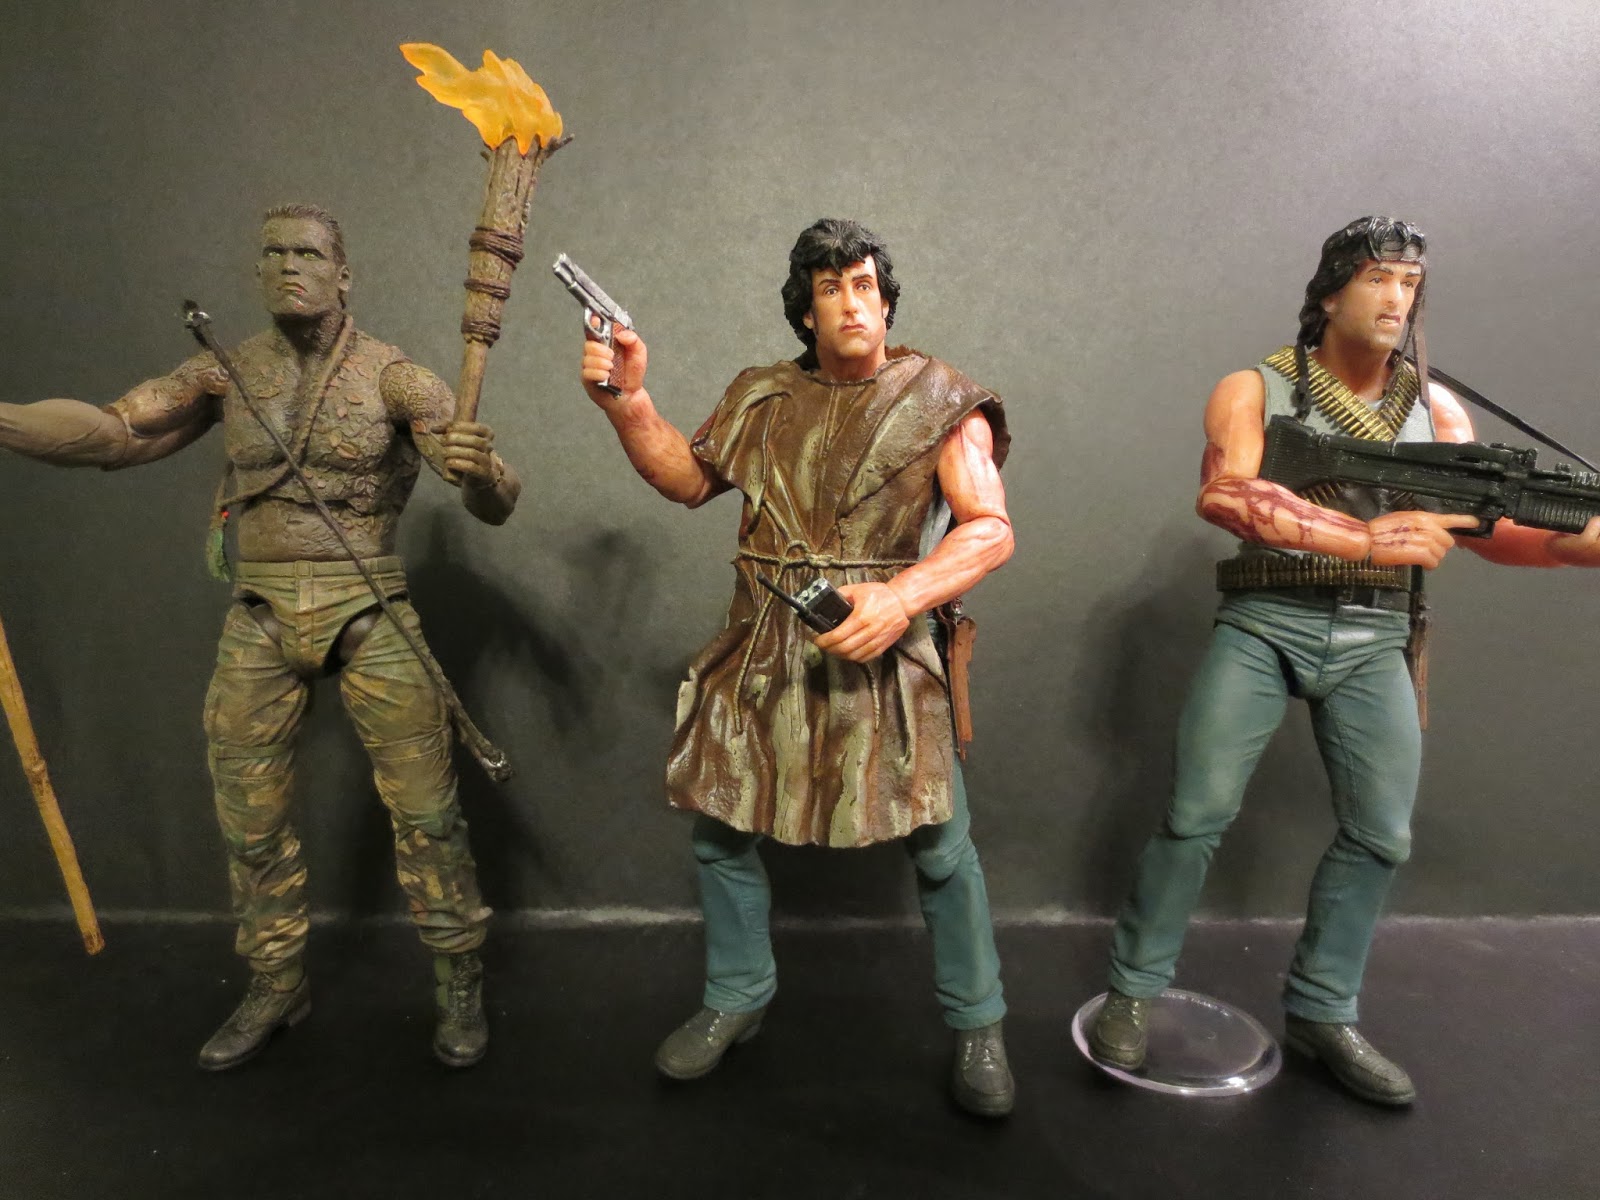 Action Figure Review: John J. Rambo (Survival Version) from Rambo 